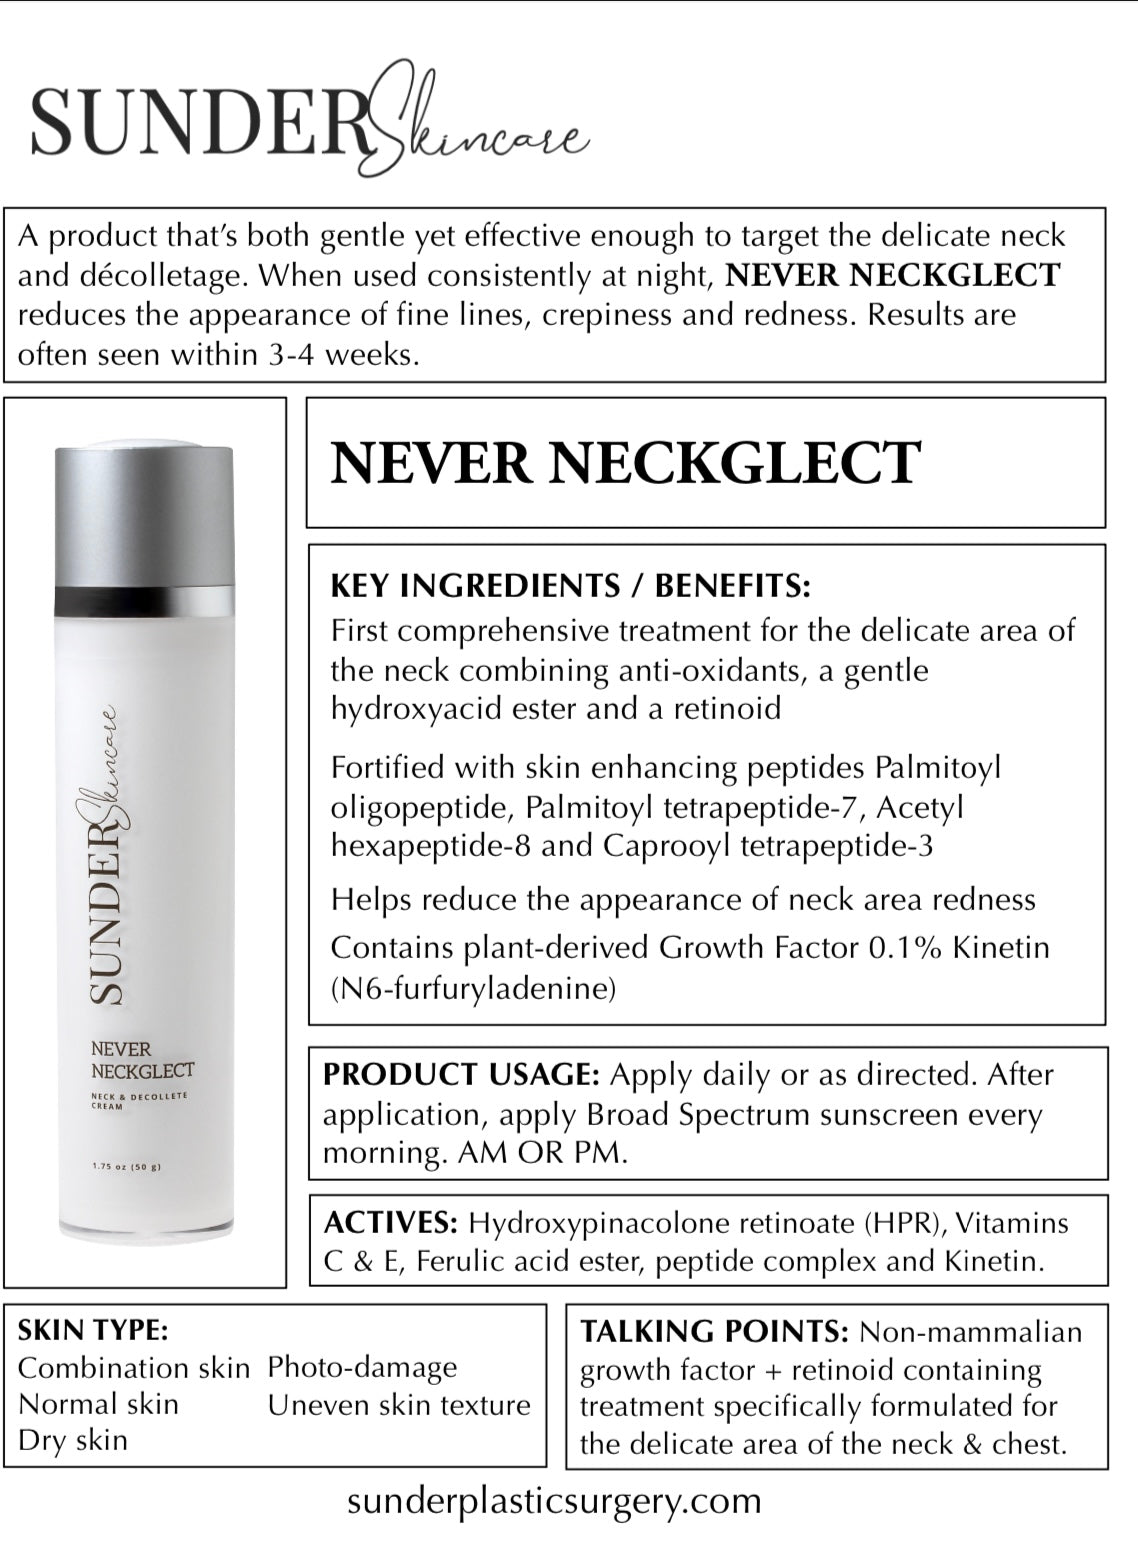 Never Neckglect Creme